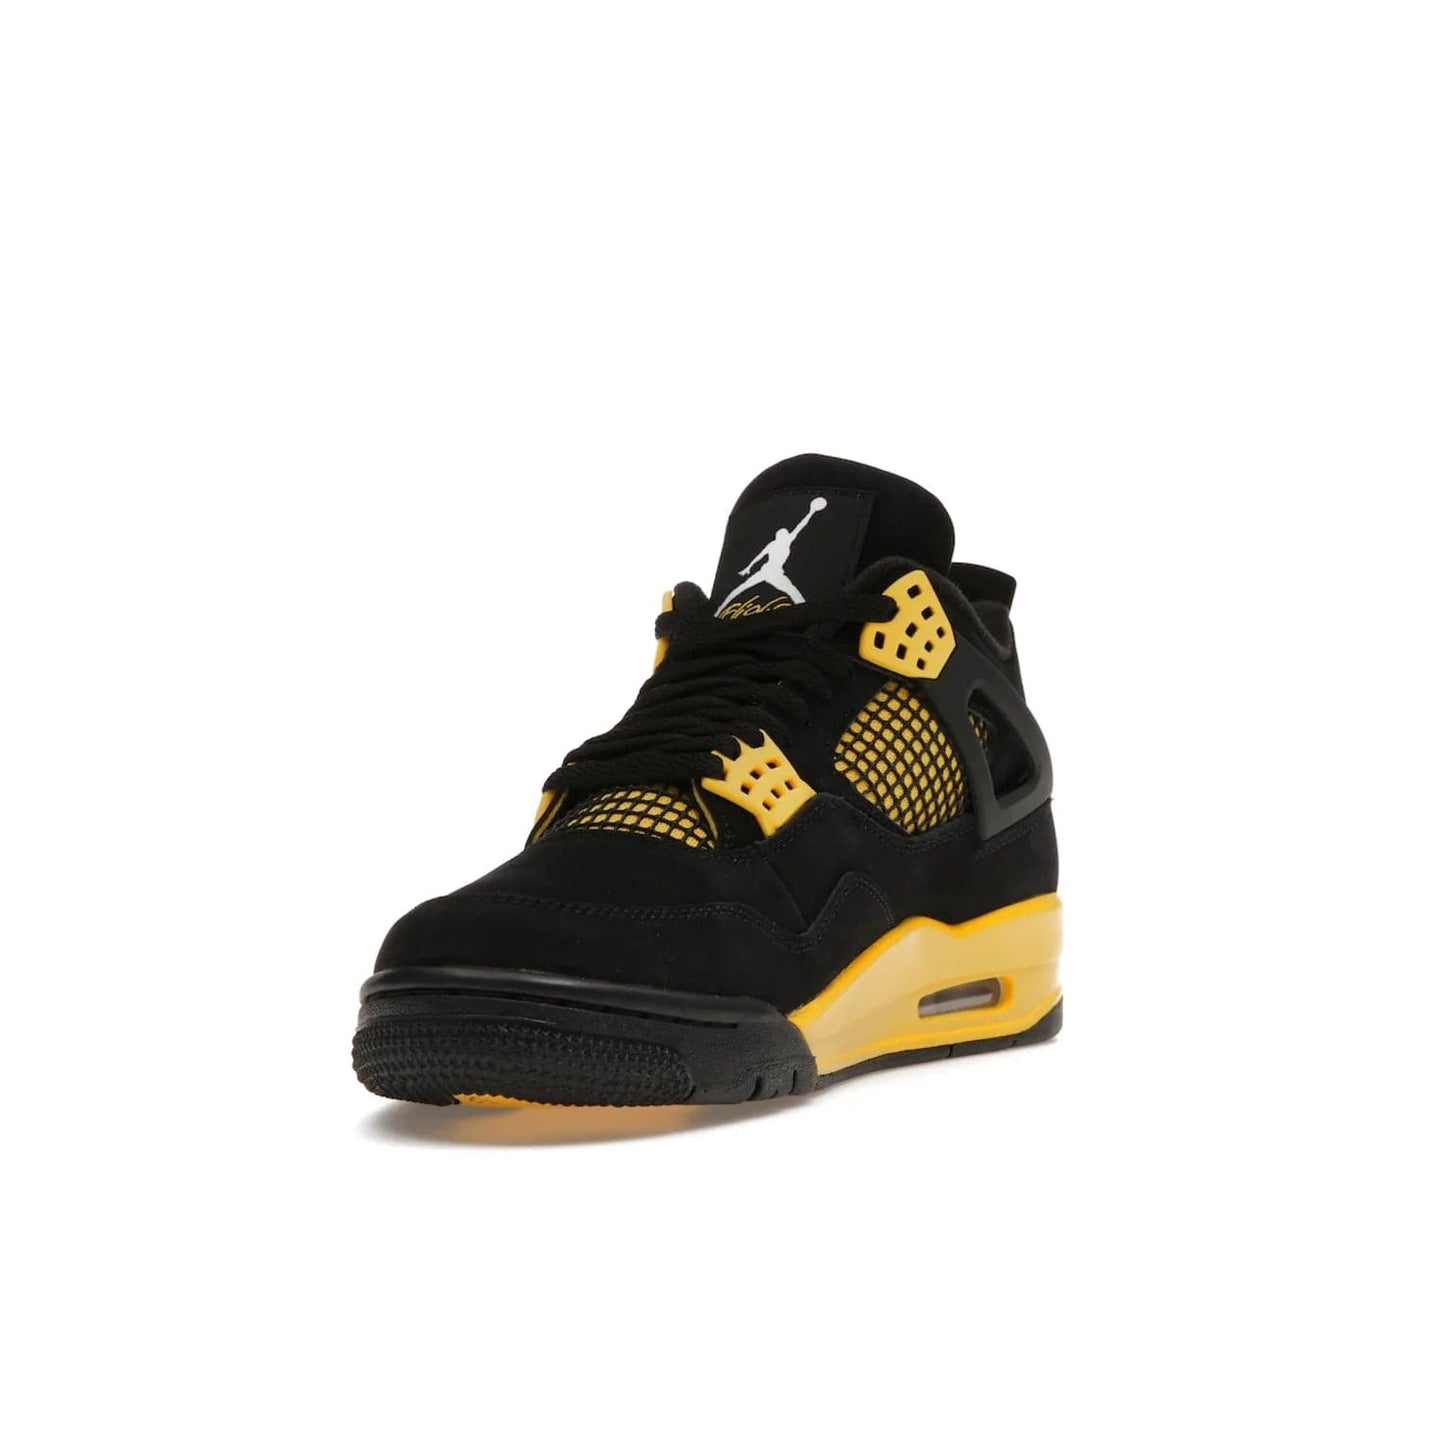 Jordan 4 Retro Thunder (2023) - Image 13 - Only at www.BallersClubKickz.com - Iconic Air Jordan 4 Retro Thunder (2023) returns with black nubuck upper and Tour Yellow details. Featuring Jumpman logo on heel tab, tongue and insoles. Dropping May 13th, 2023.